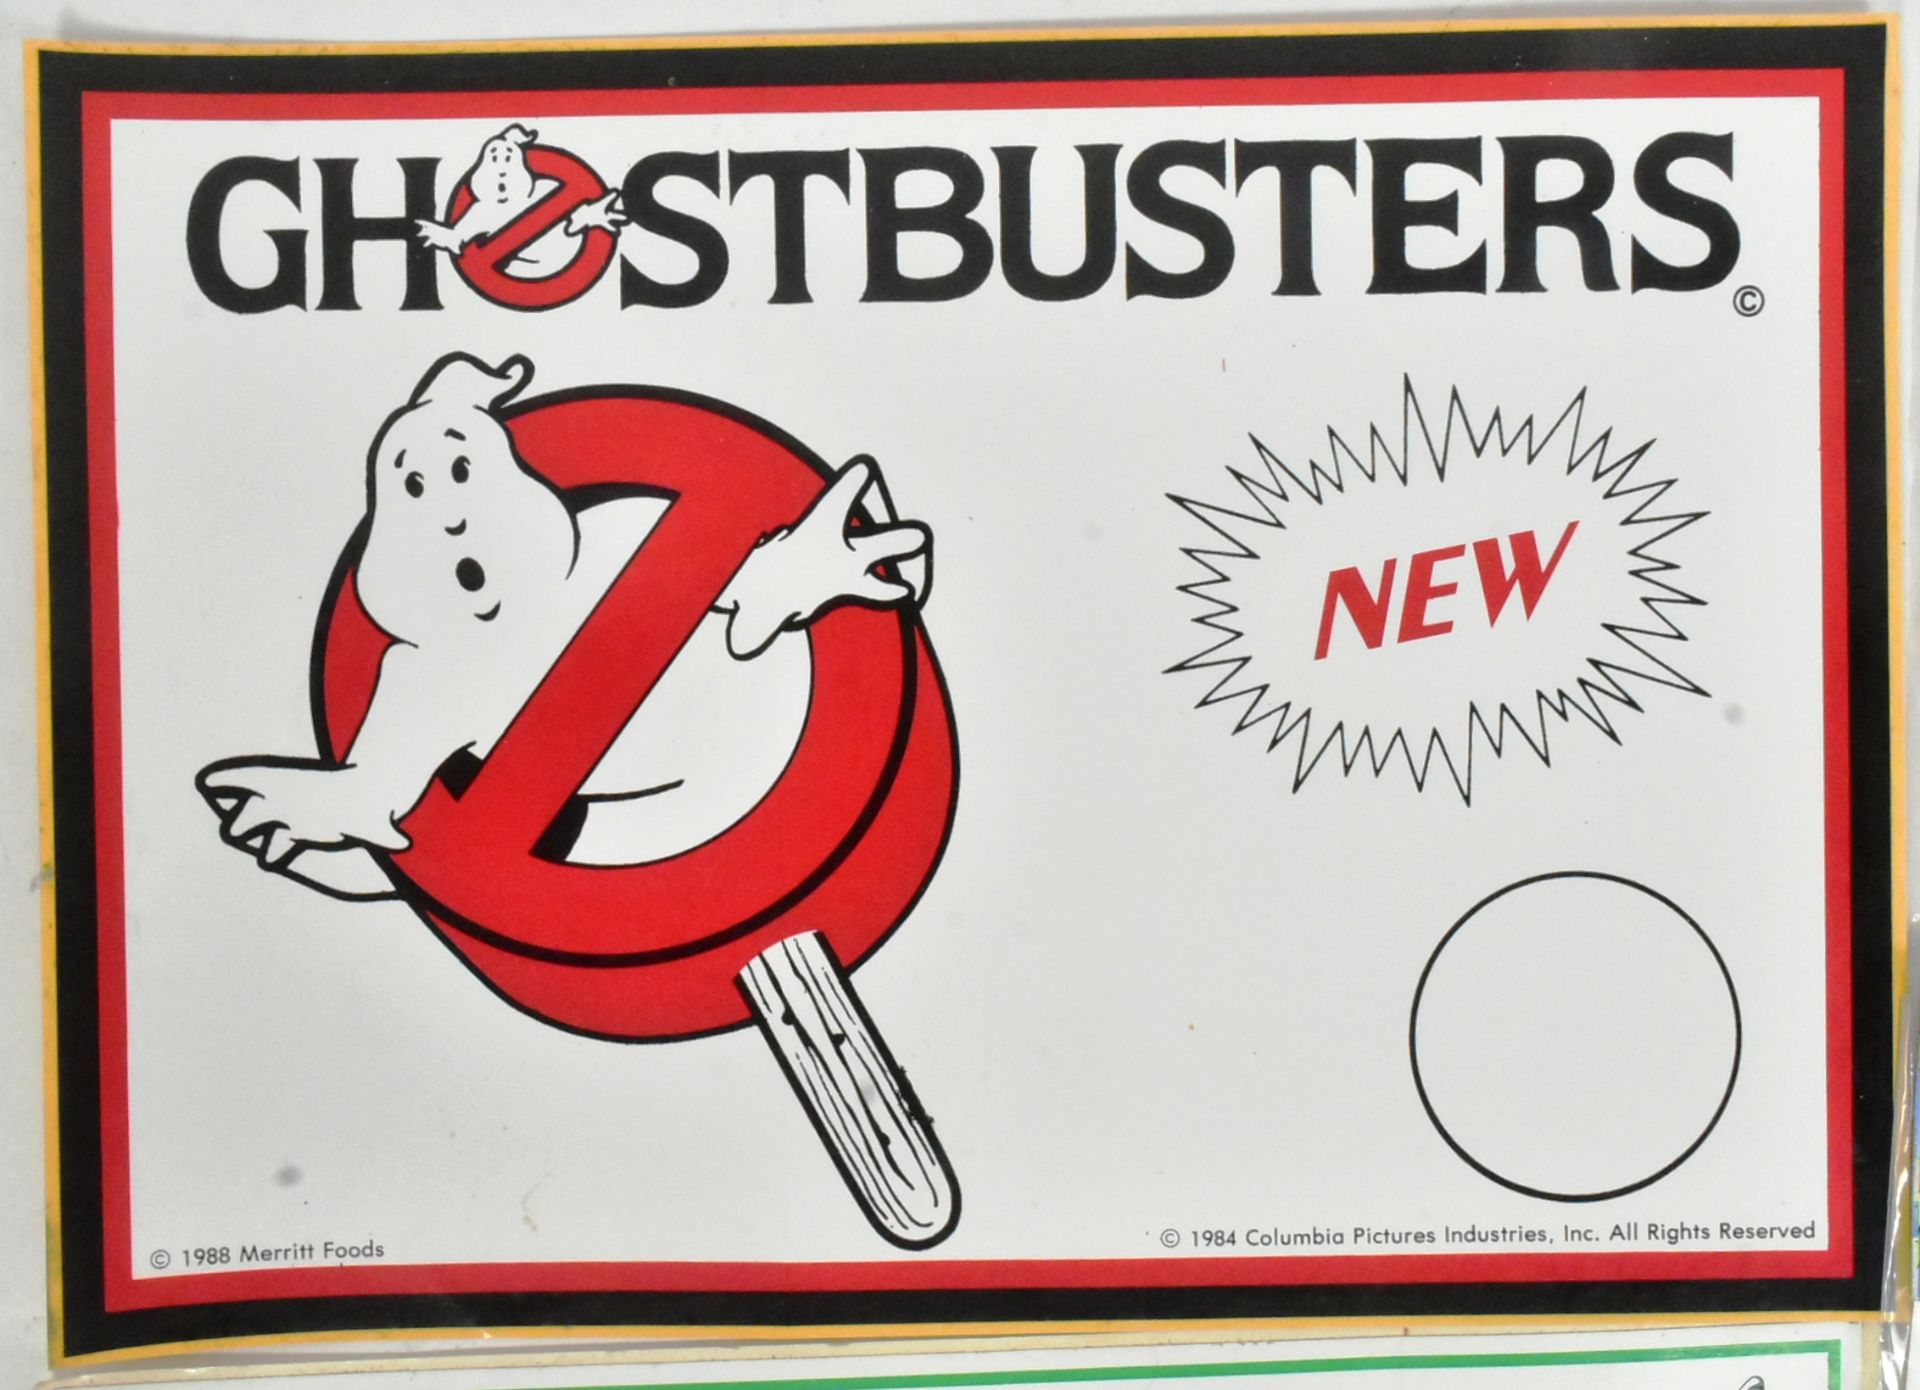 GHOSTBUSTERS - COLLECTION OF VINTAGE EX-SHOP STOCK MERCHANDISE - Image 2 of 3